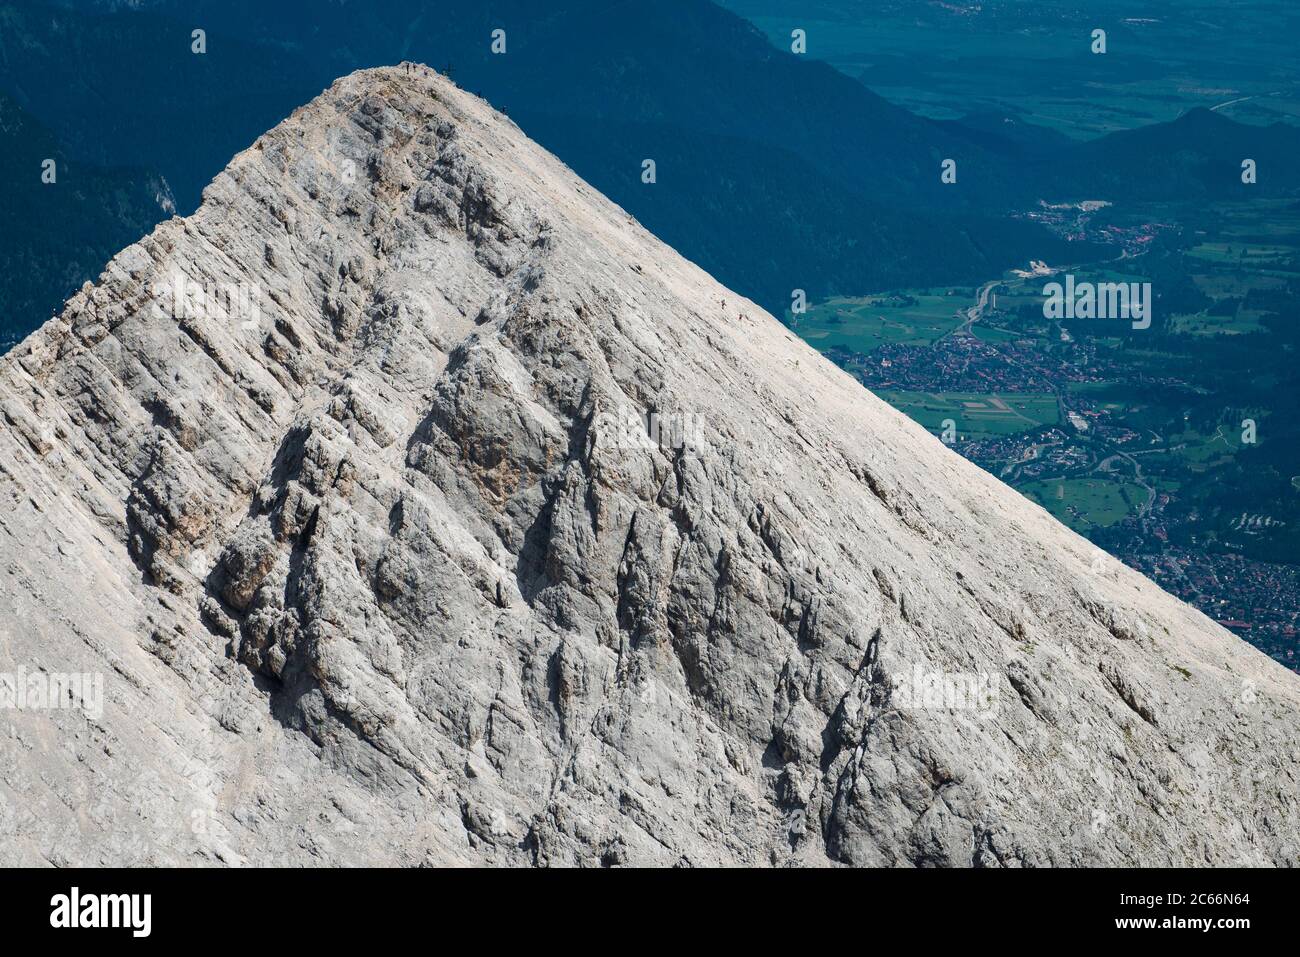 South face of Alpspitze Peak, mountaineers, Garmisch-Partenkirchen in the background, aerial view, Bavaria, Germany Stock Photo